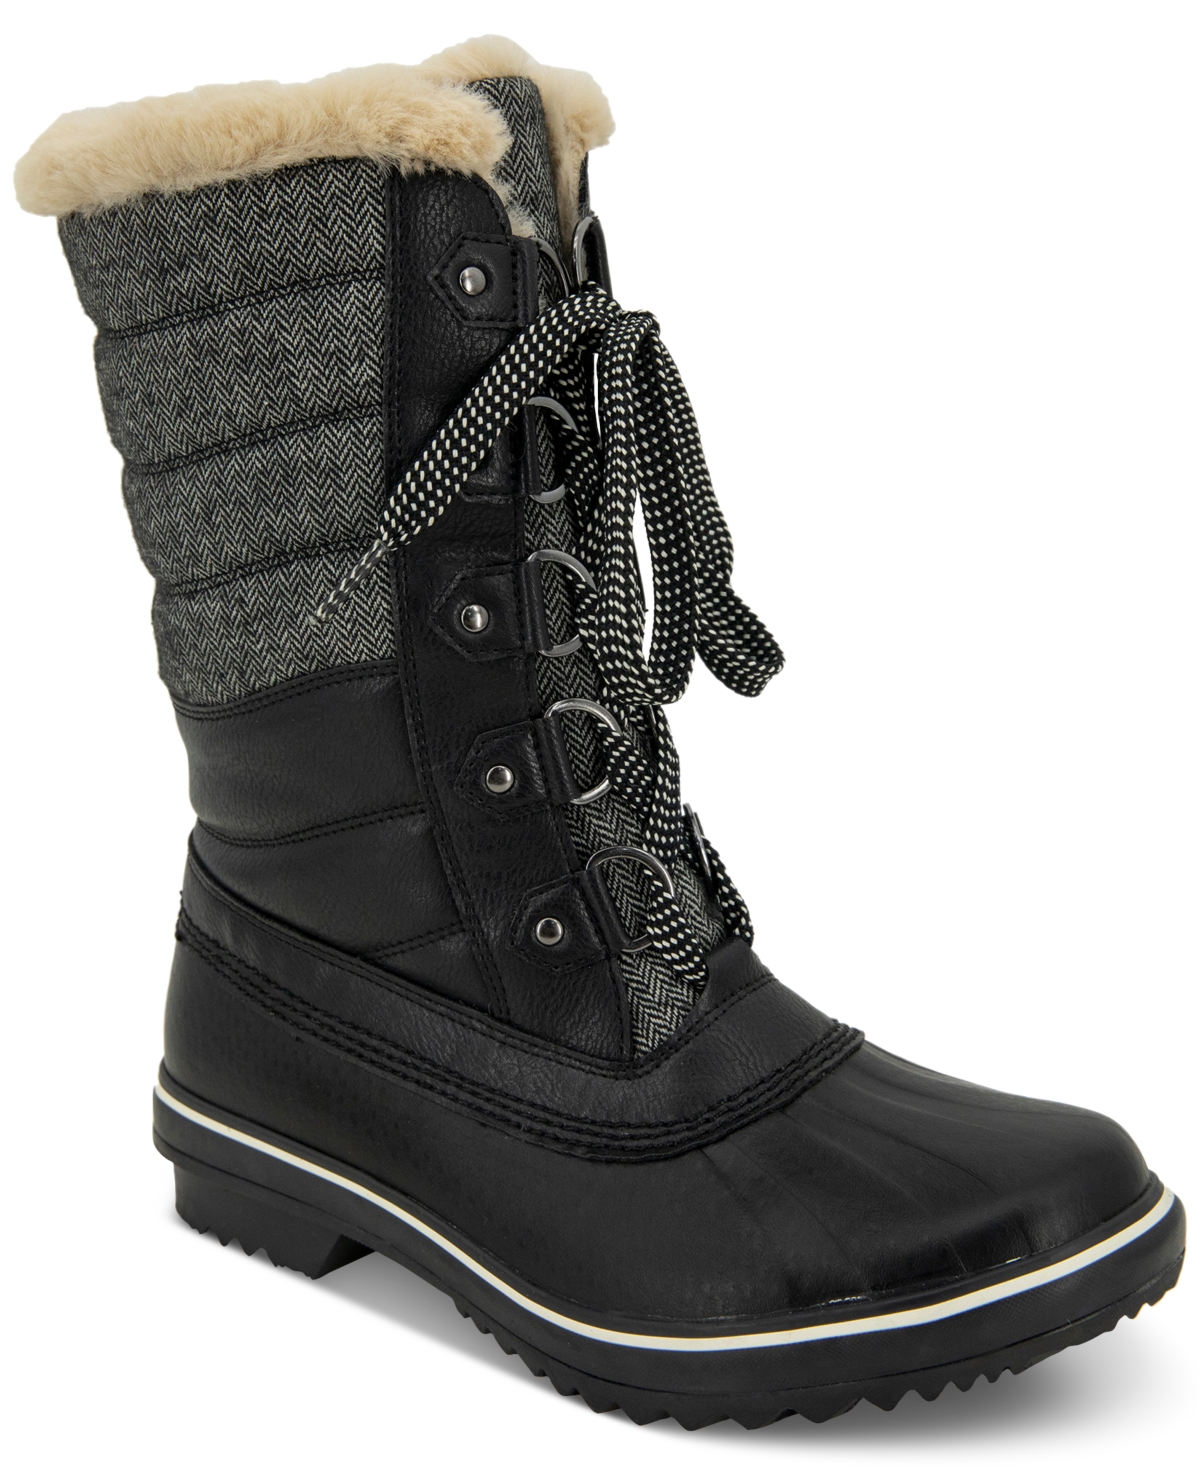 Women's Siberia Waterproof Lace-Up Quilted Cold-Weather Boots - Brown